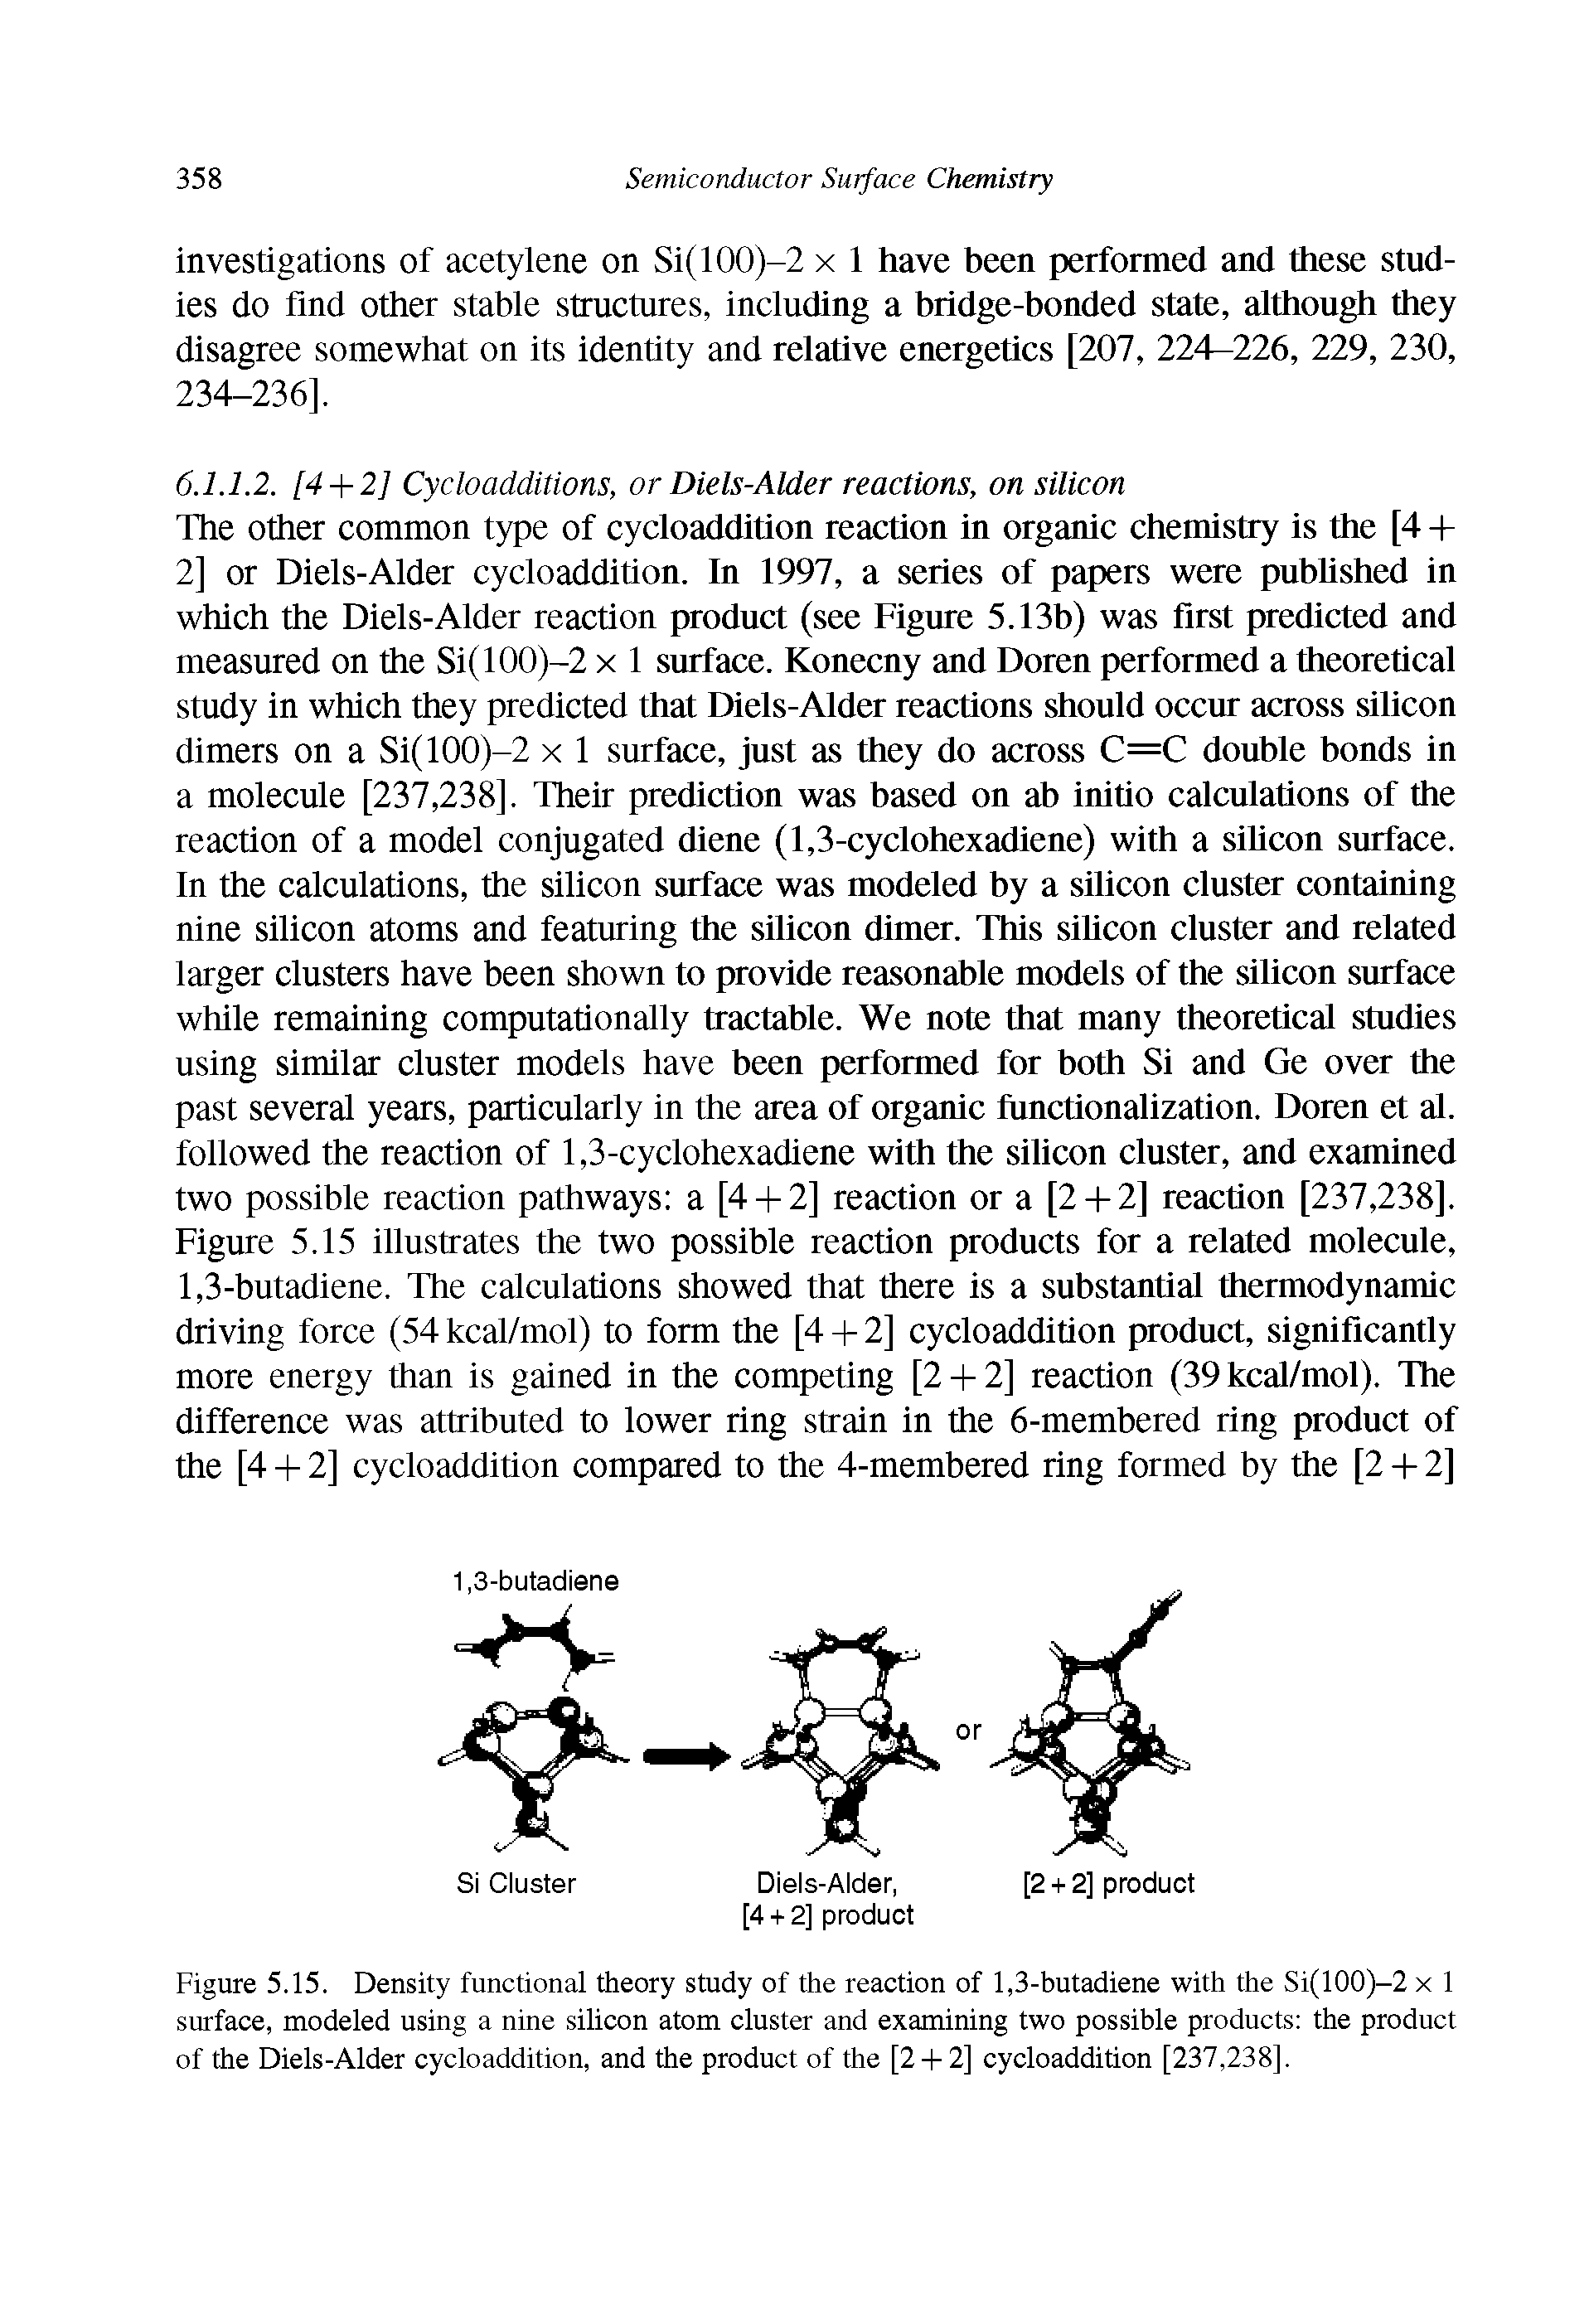 Figure 5.15. Density functional theory study of the reaction of 1,3-butadiene with the Si(100)—2 x 1 surface, modeled using a nine silicon atom cluster and examining two possible products the product of the Diels-Alder cycloaddition, and the product of the [2 + 2] cycloaddition [237,238].